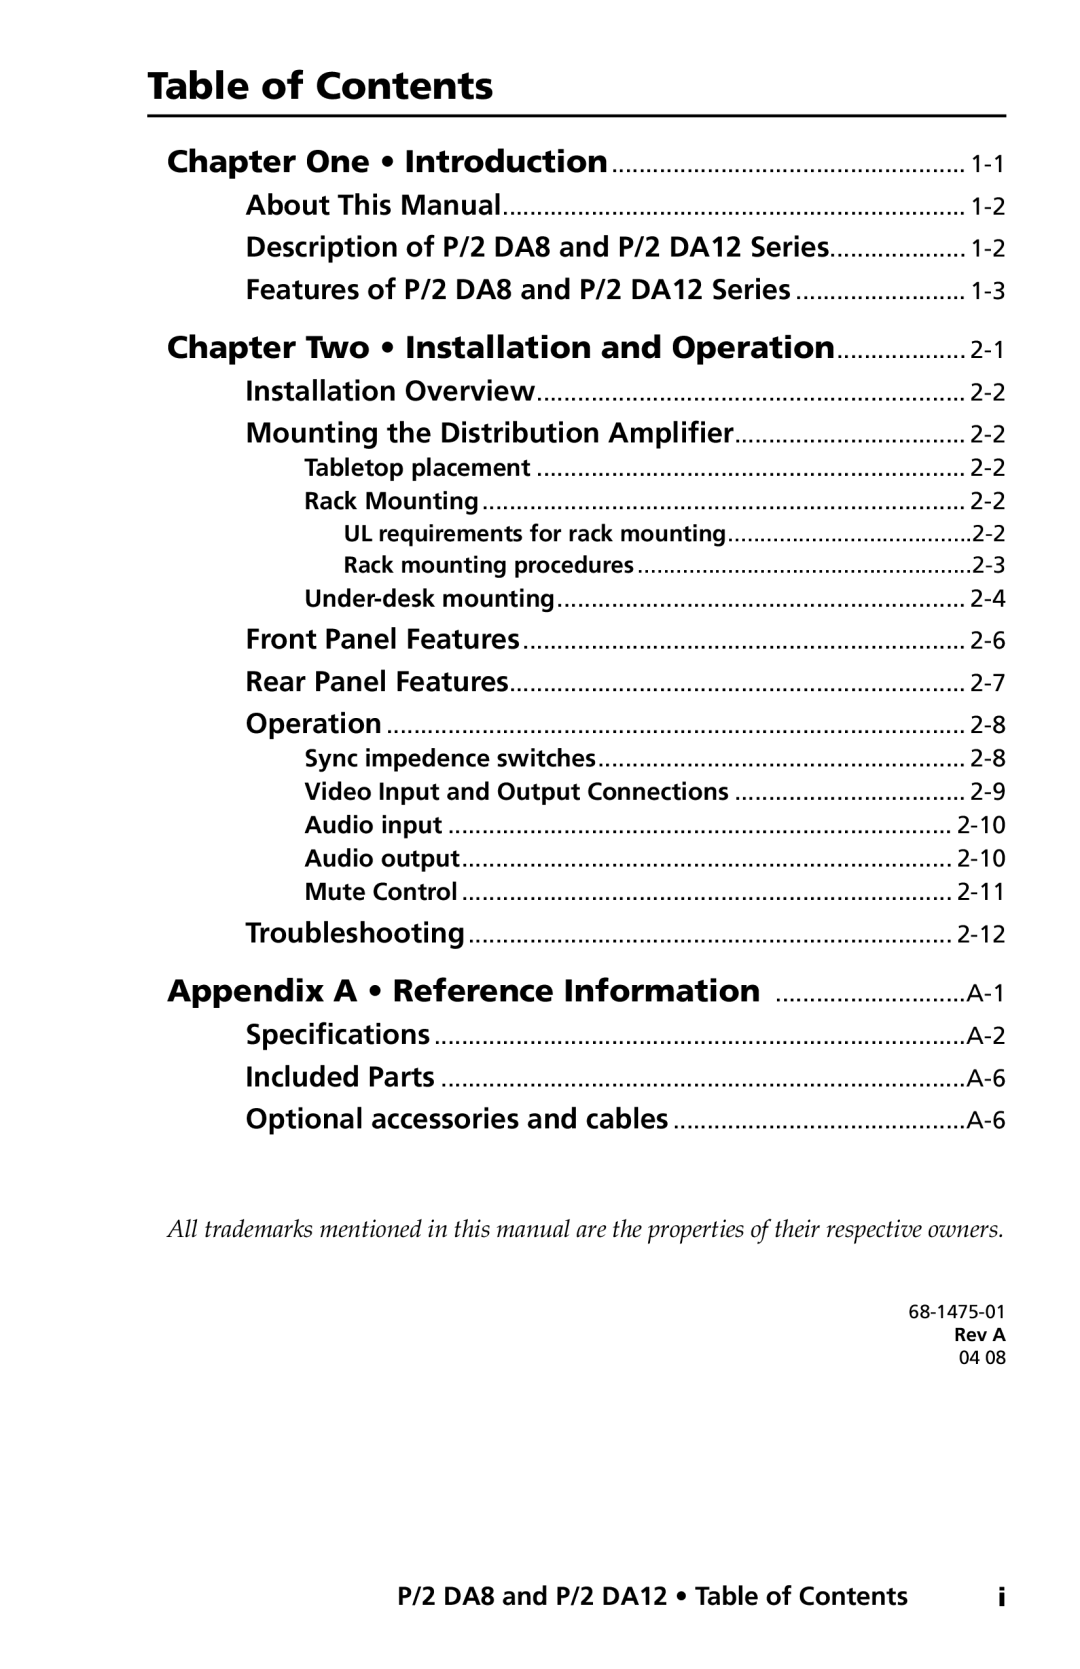 Extron electronic P/2 DA12 Series, P/2 DA8 user manual Table of Contents, Chapter Two Installation and Operation 